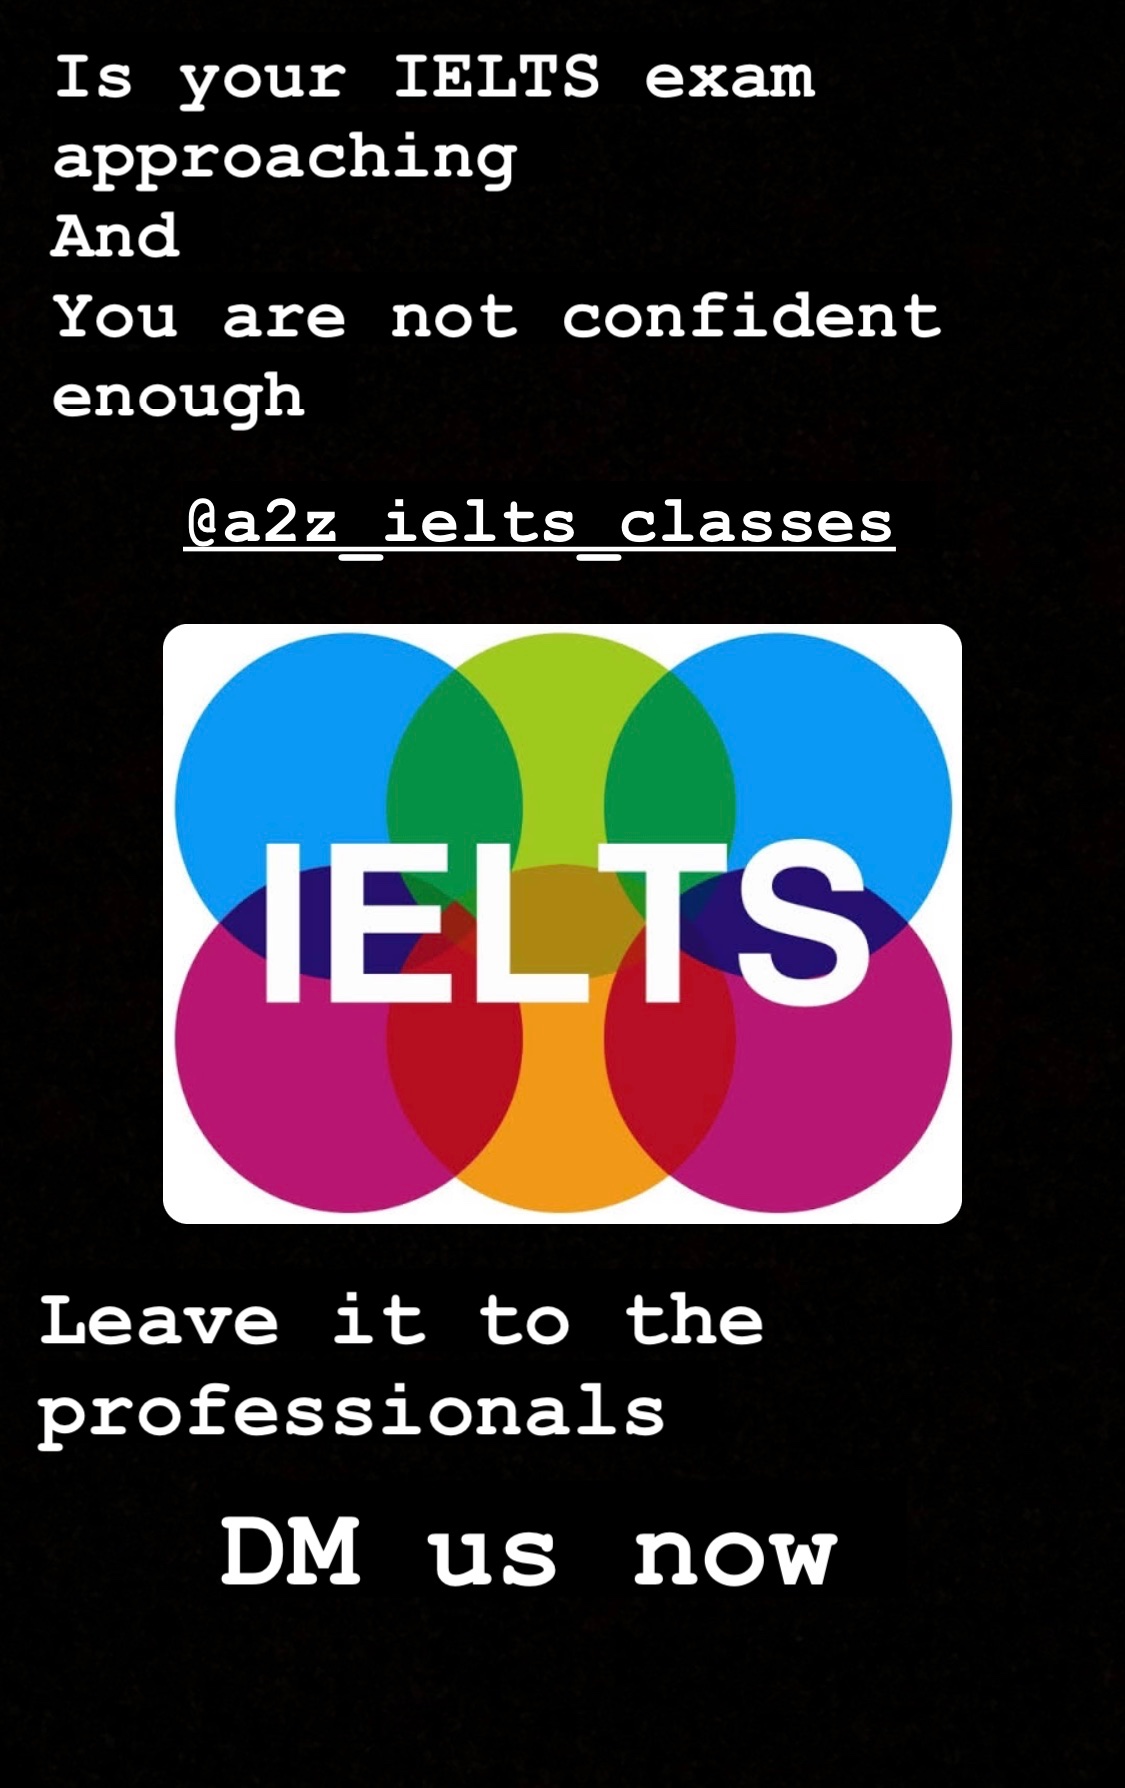 IELTS, Exam coachings; Exp: Some experience (0-1 years)